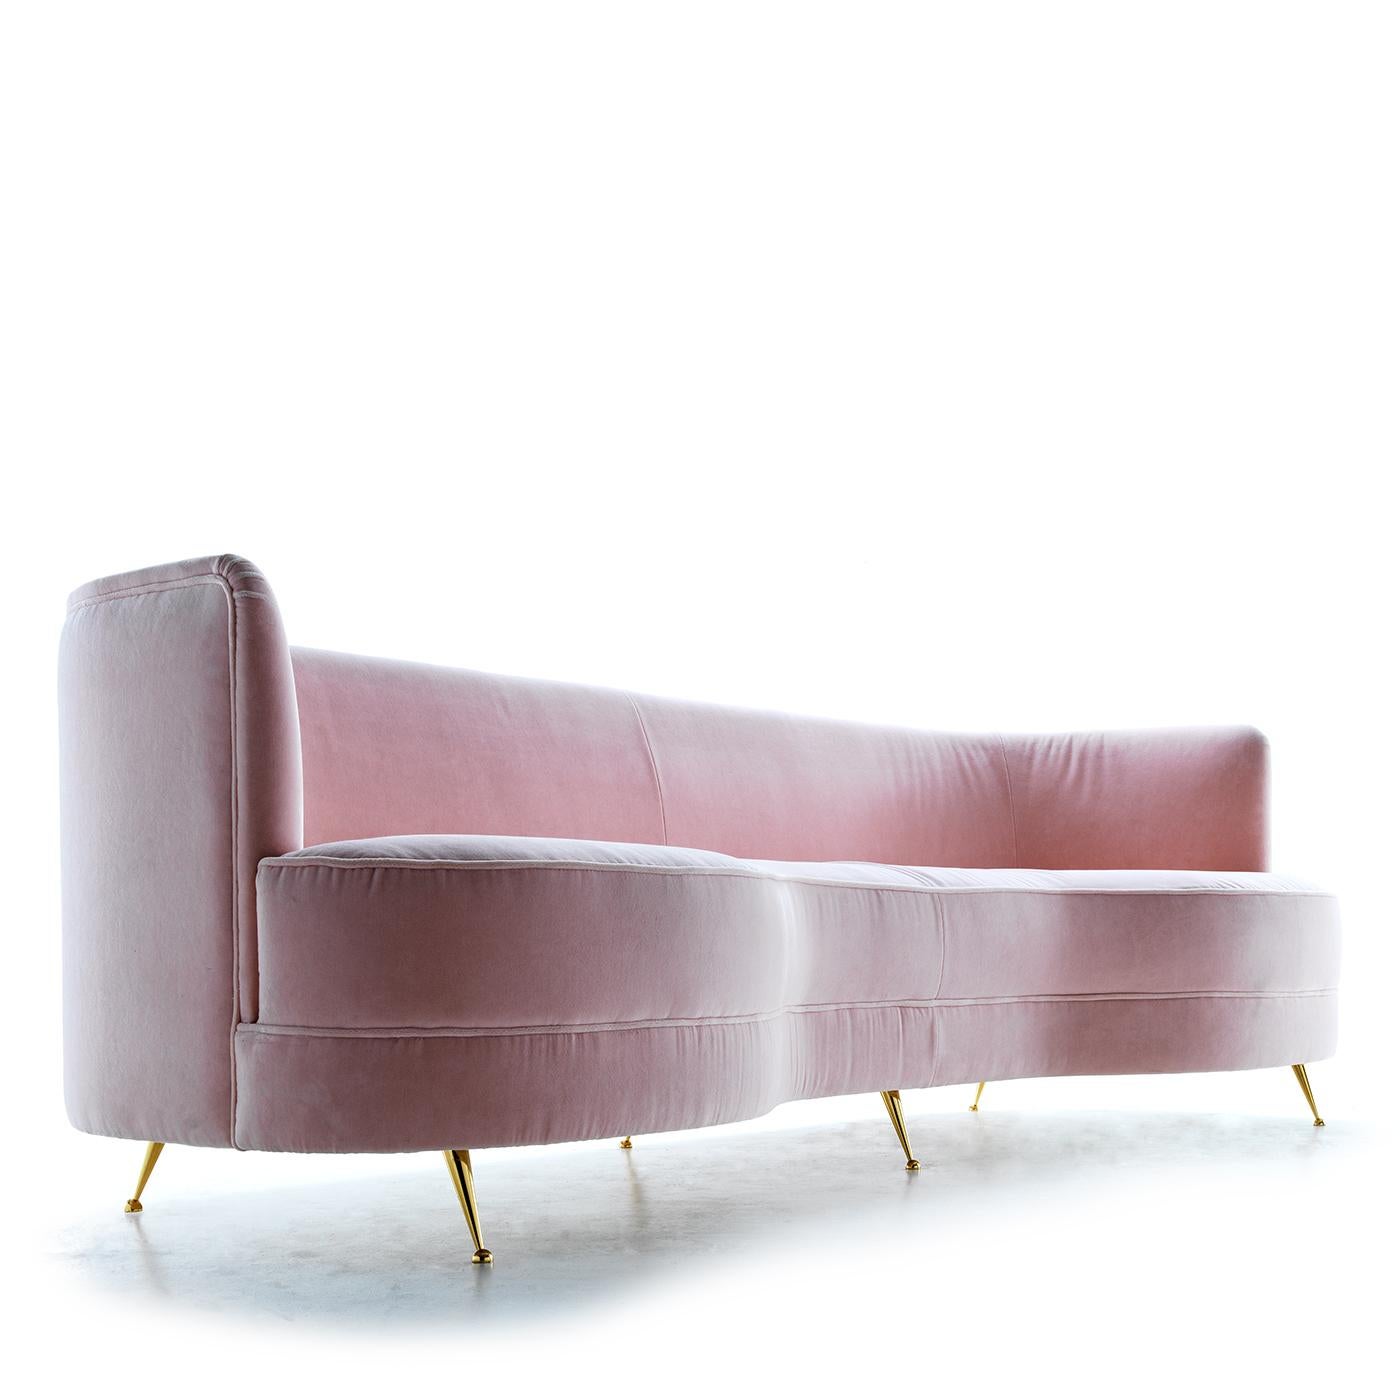 Channeling a seductive feminine flair, this sofa strikes with its soft curves and glamorous aesthetic. Its embracing shape pairs well with the comfortable velvet upholstery in pastel pink, covering the generous padding underneath that makes the